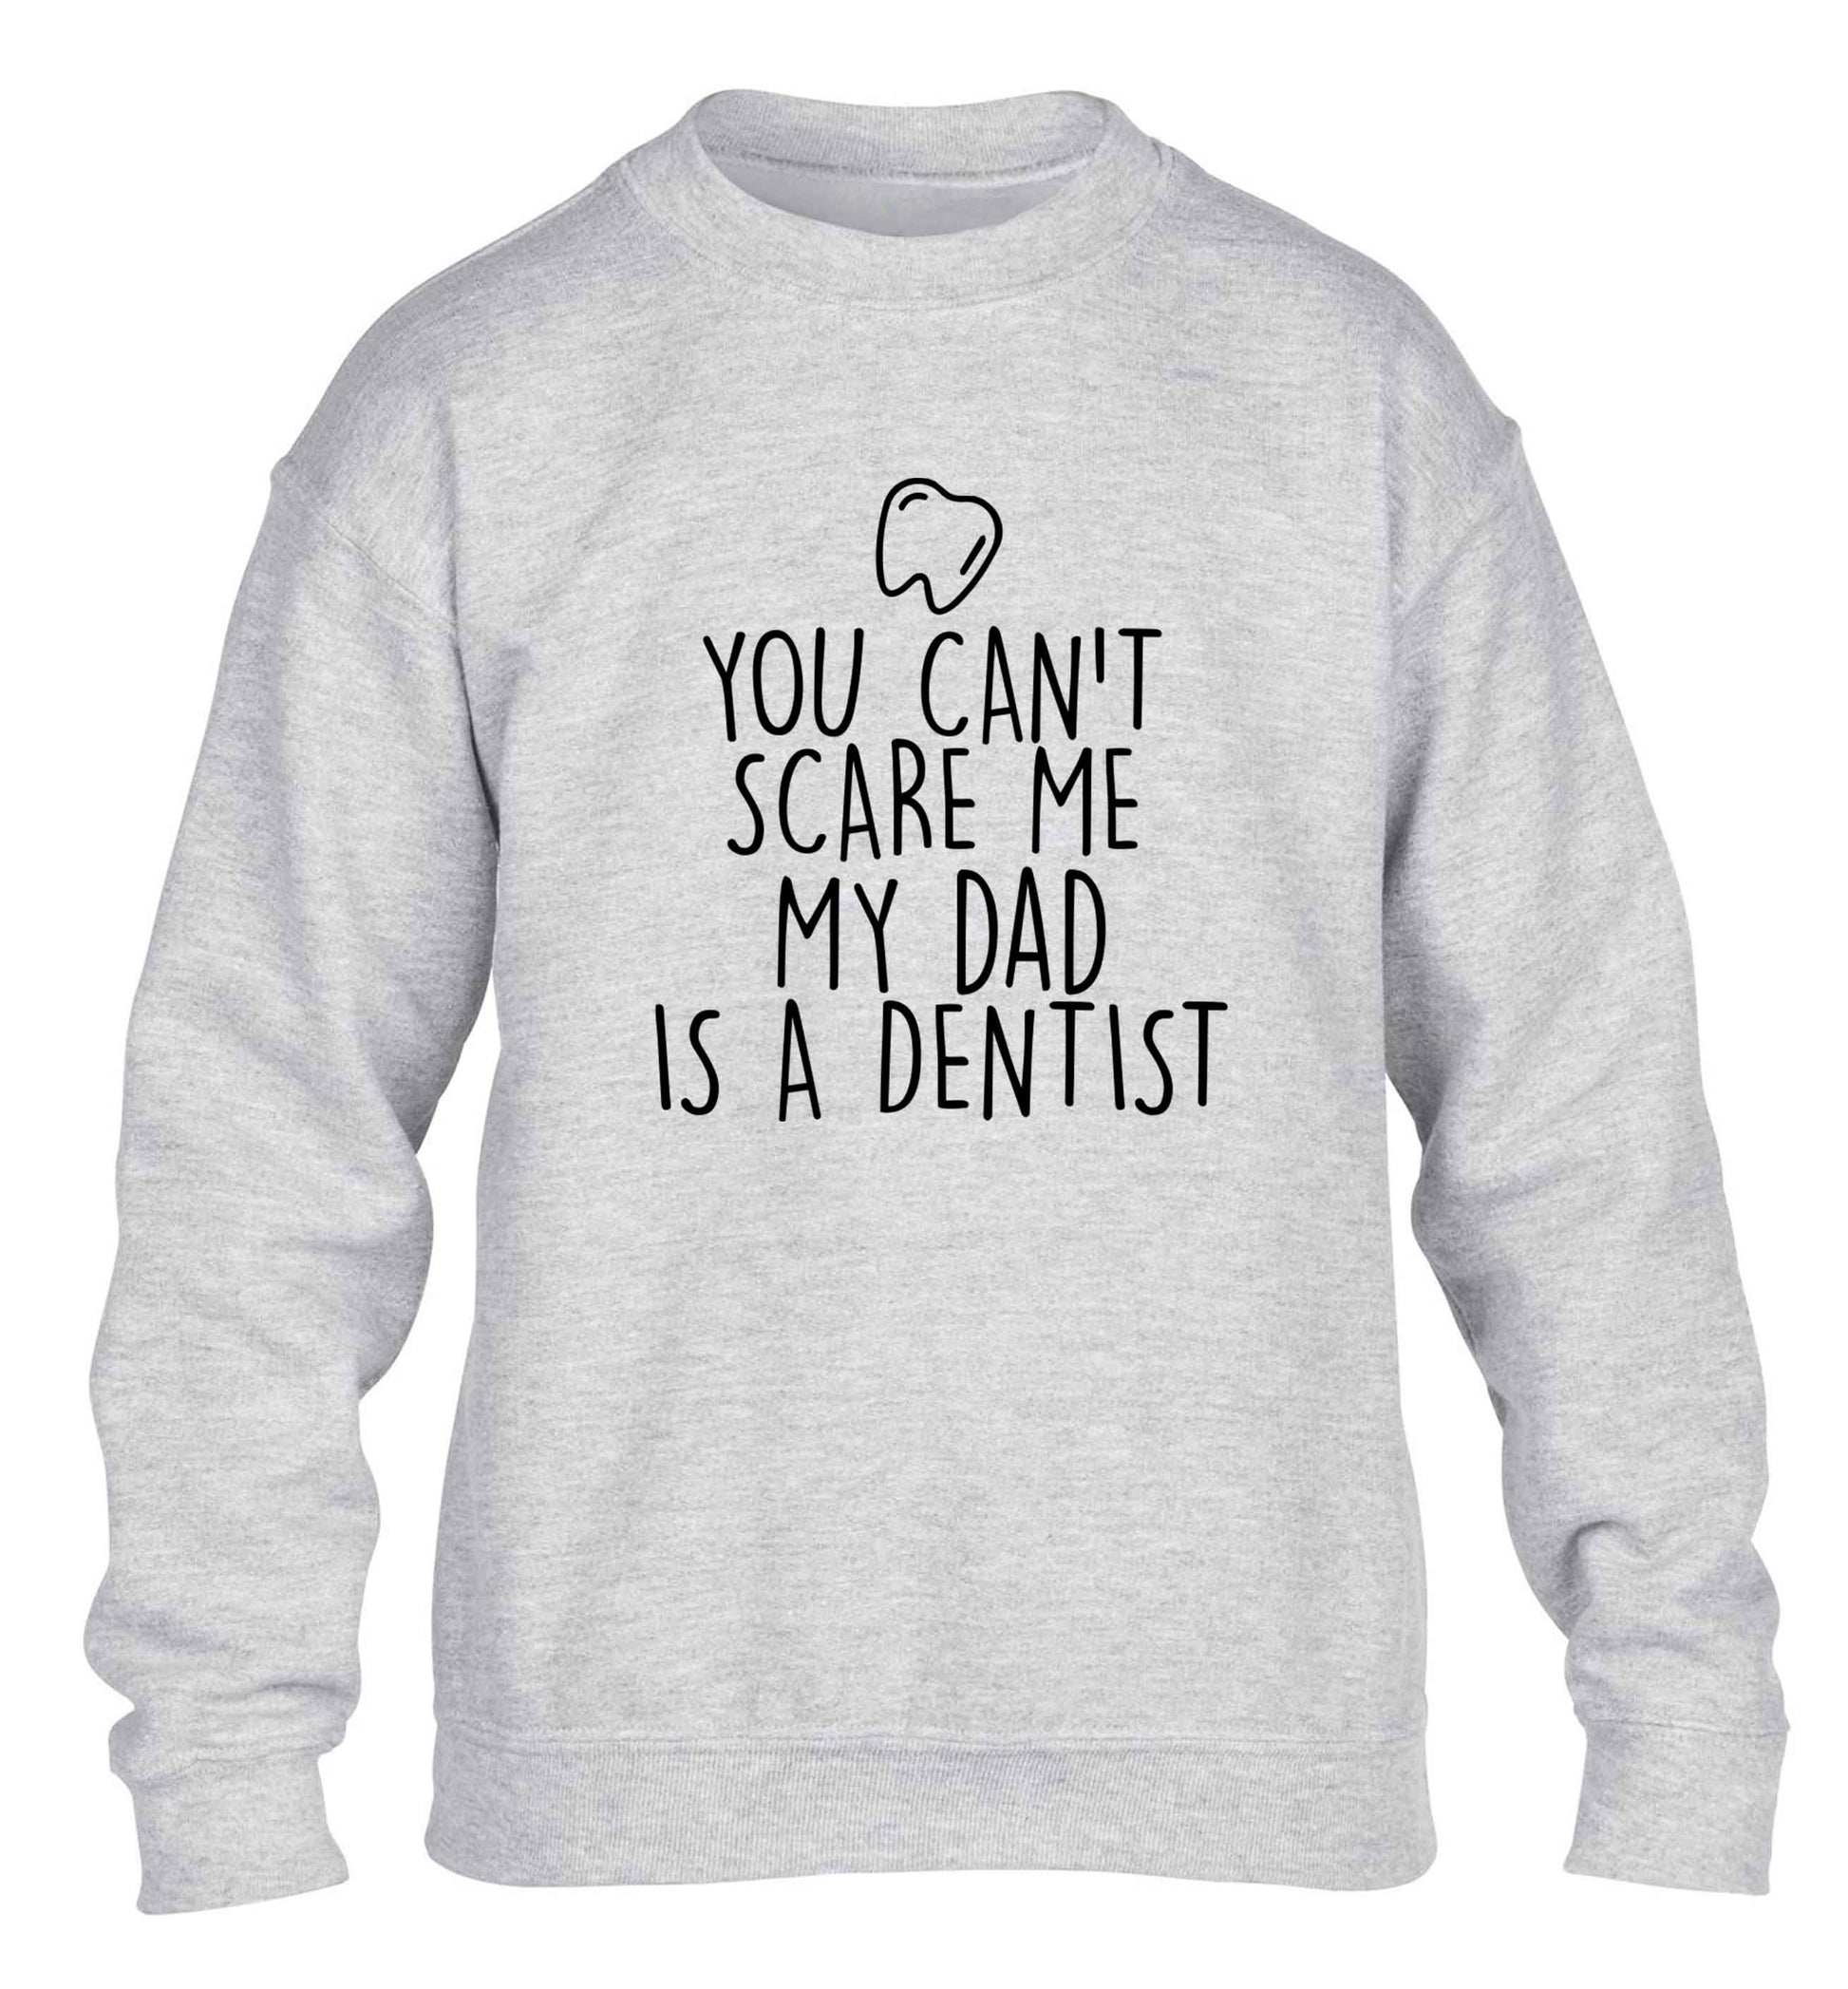 You can't scare me my dad is a dentist children's grey sweater 12-13 Years